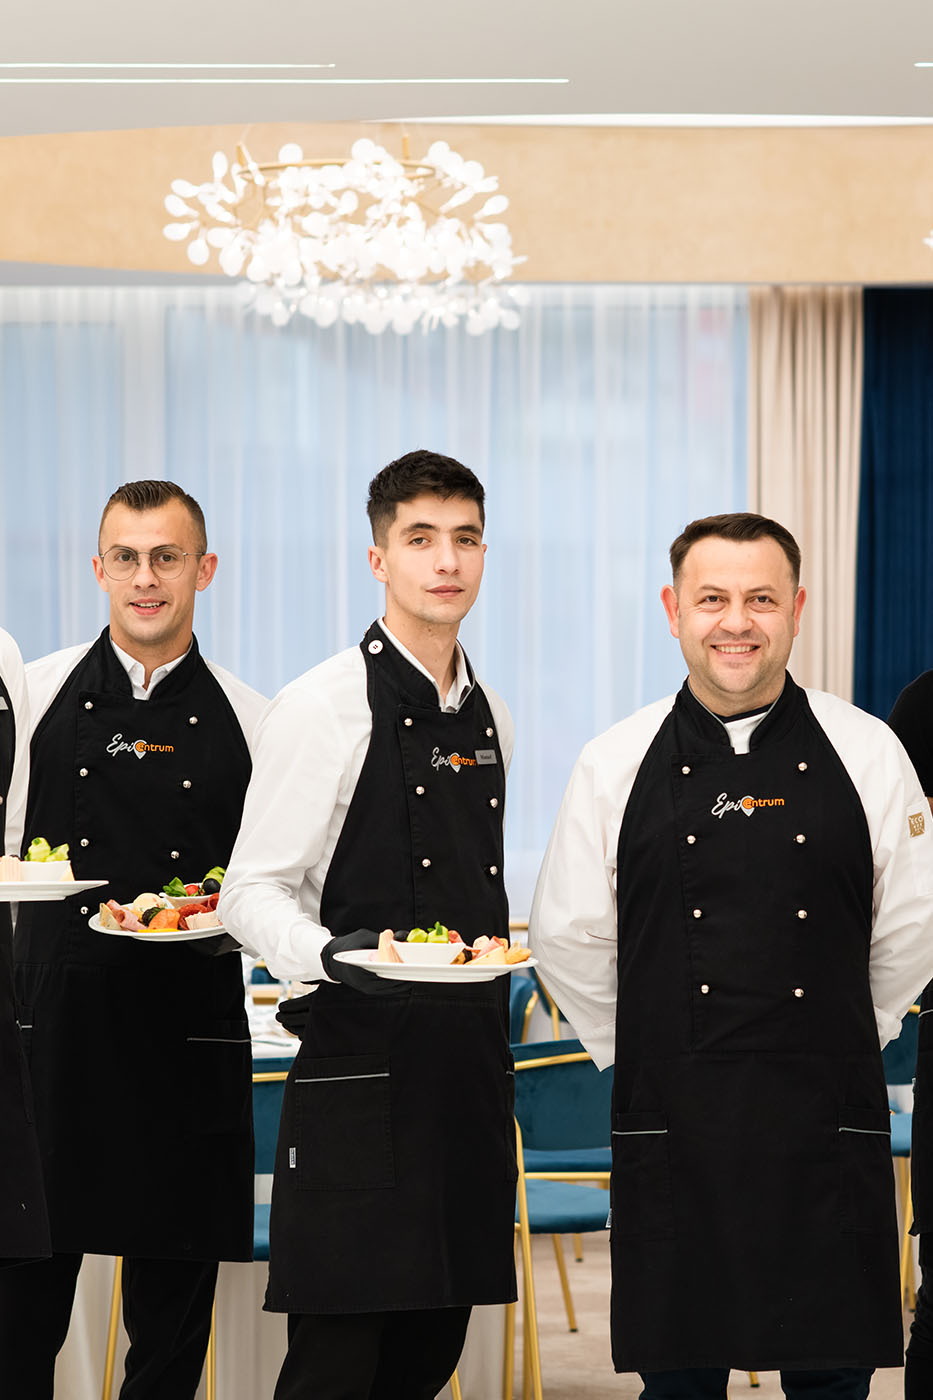 A group of men in black aprons holding plates of food in a hotel kitchen.